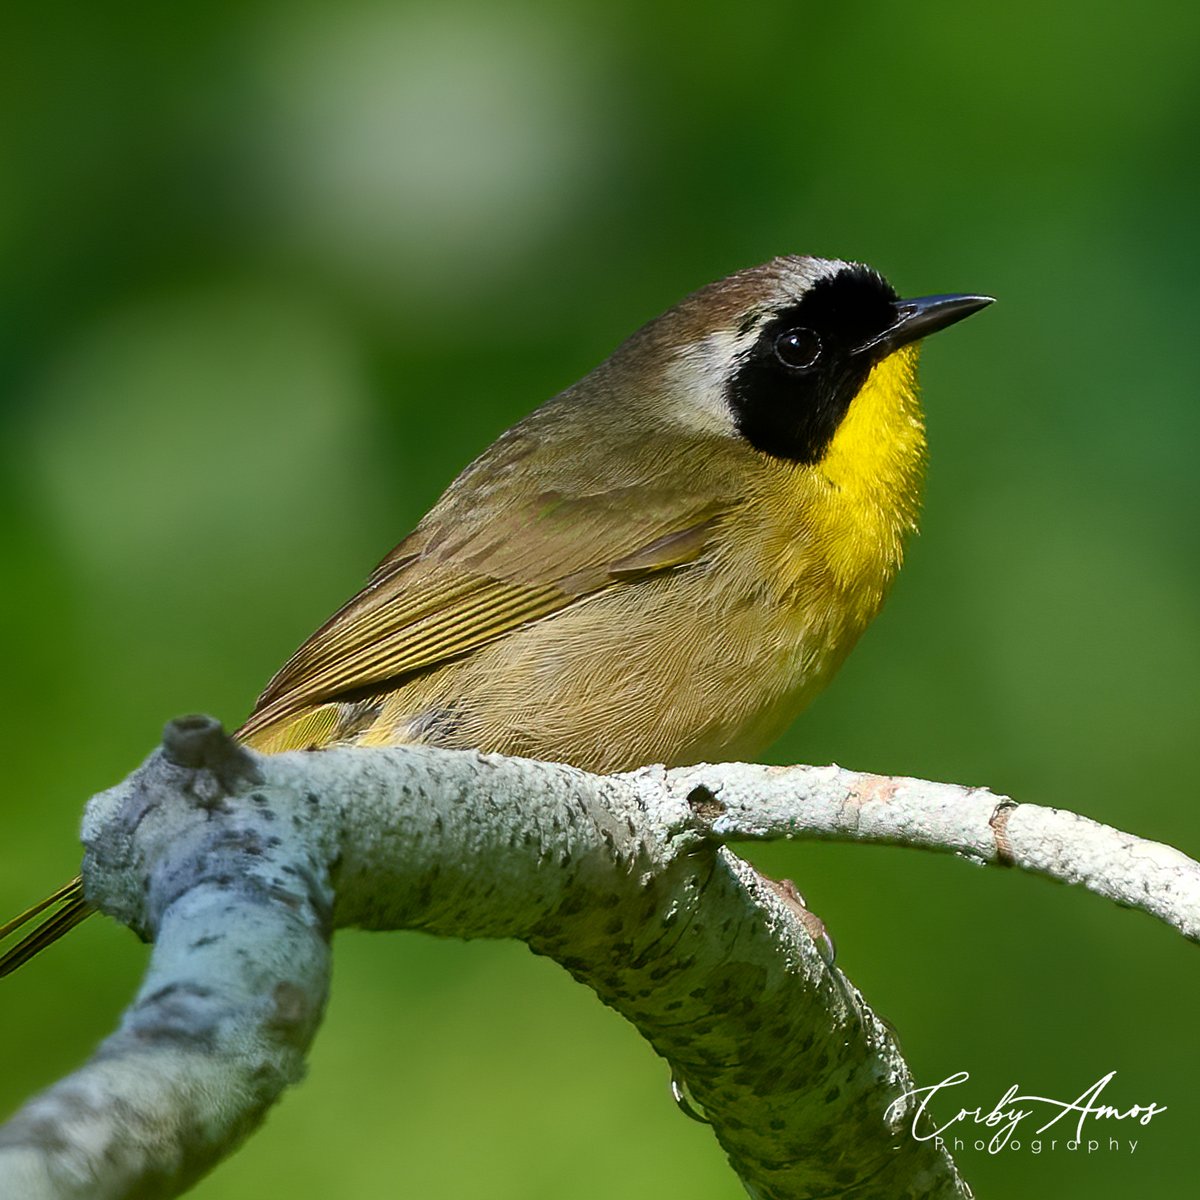 These have been anything but common for me this year. Common Yellowthroat.
.
ko-fi.com/corbyamos
.
linktr.ee/corbyamos
.
#birdphotography #birdwatching #birding #BirdTwitter #twitterbirds #birdpics